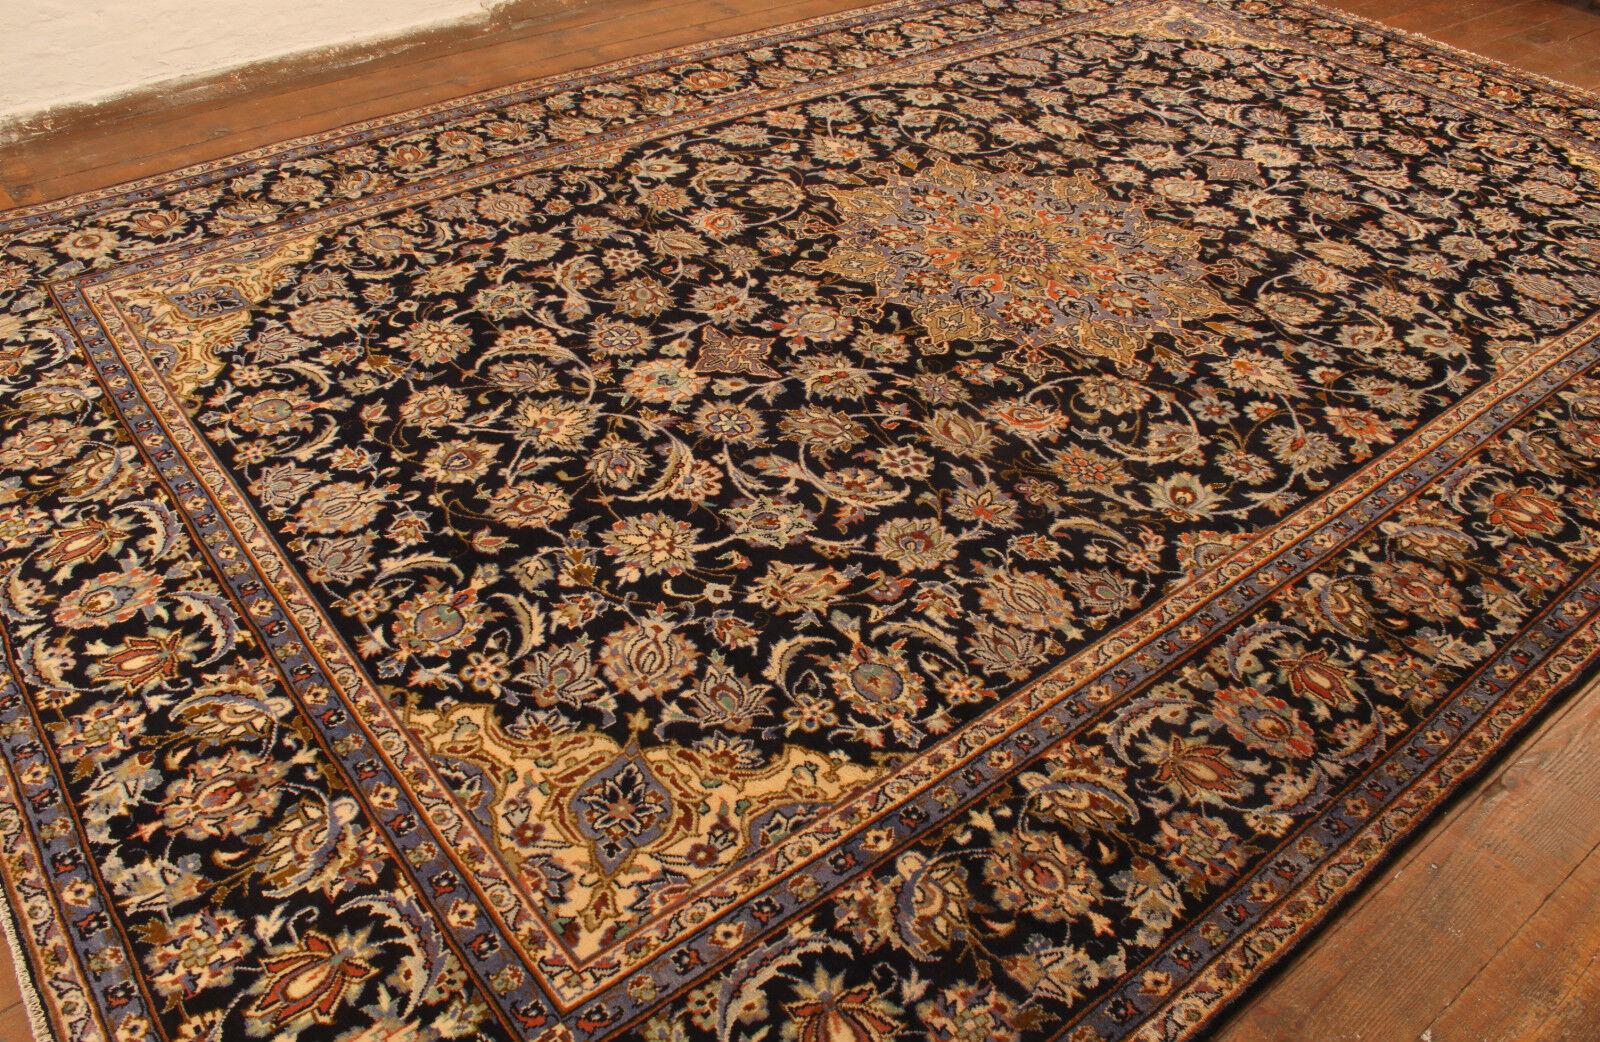 Handmade Vintage Persian Style Tabriz Rug 9.5' x 14.5', 1970s - 1T35 In Good Condition For Sale In Bordeaux, FR